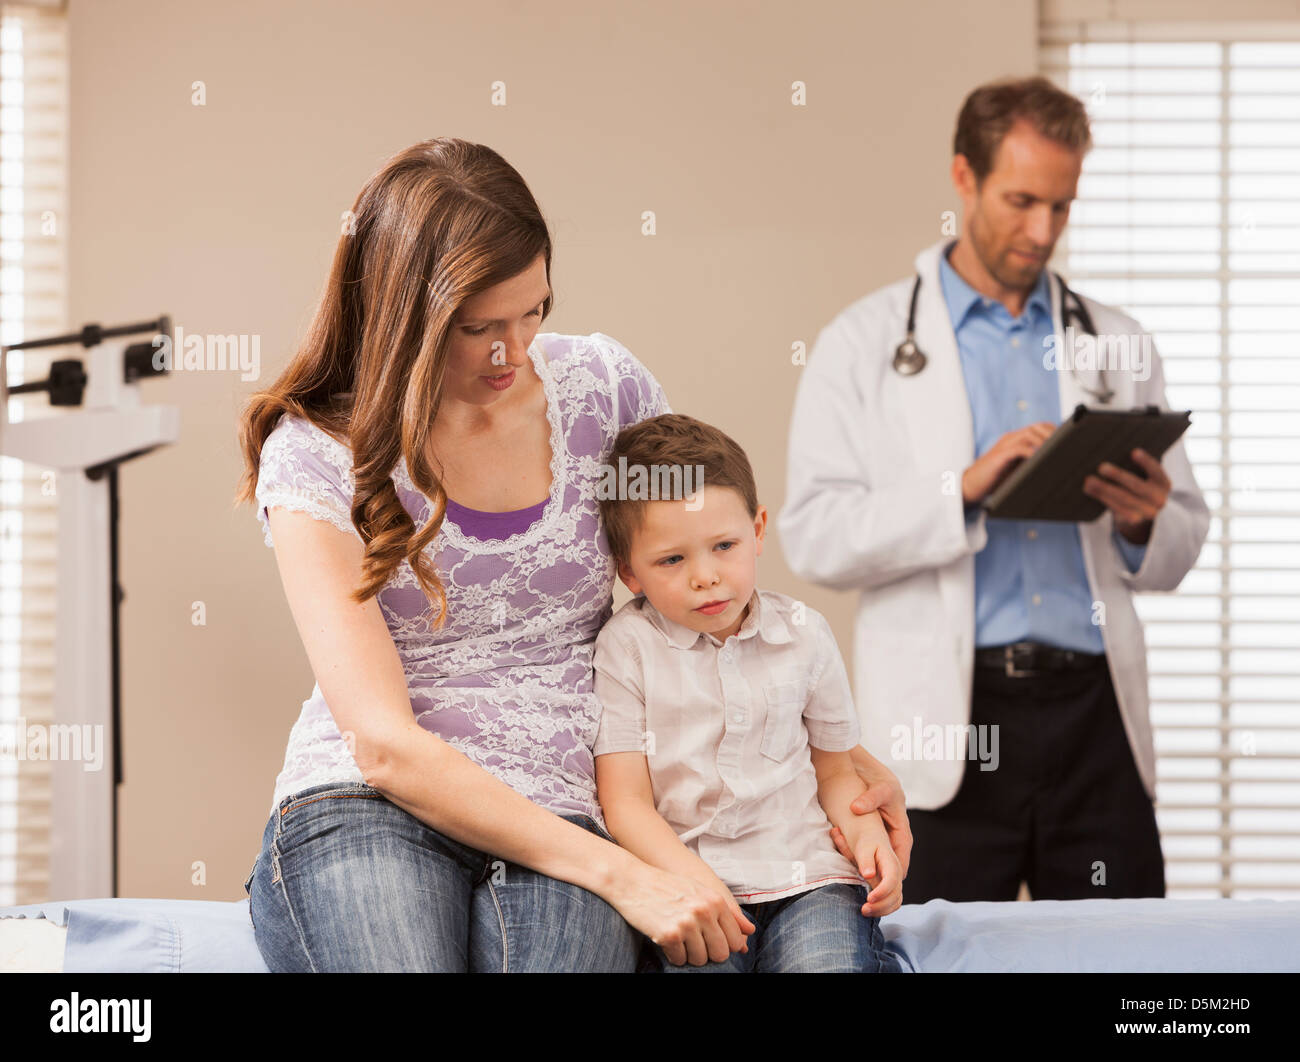 Mother with son (2-3) in doctor's office Stock Photo